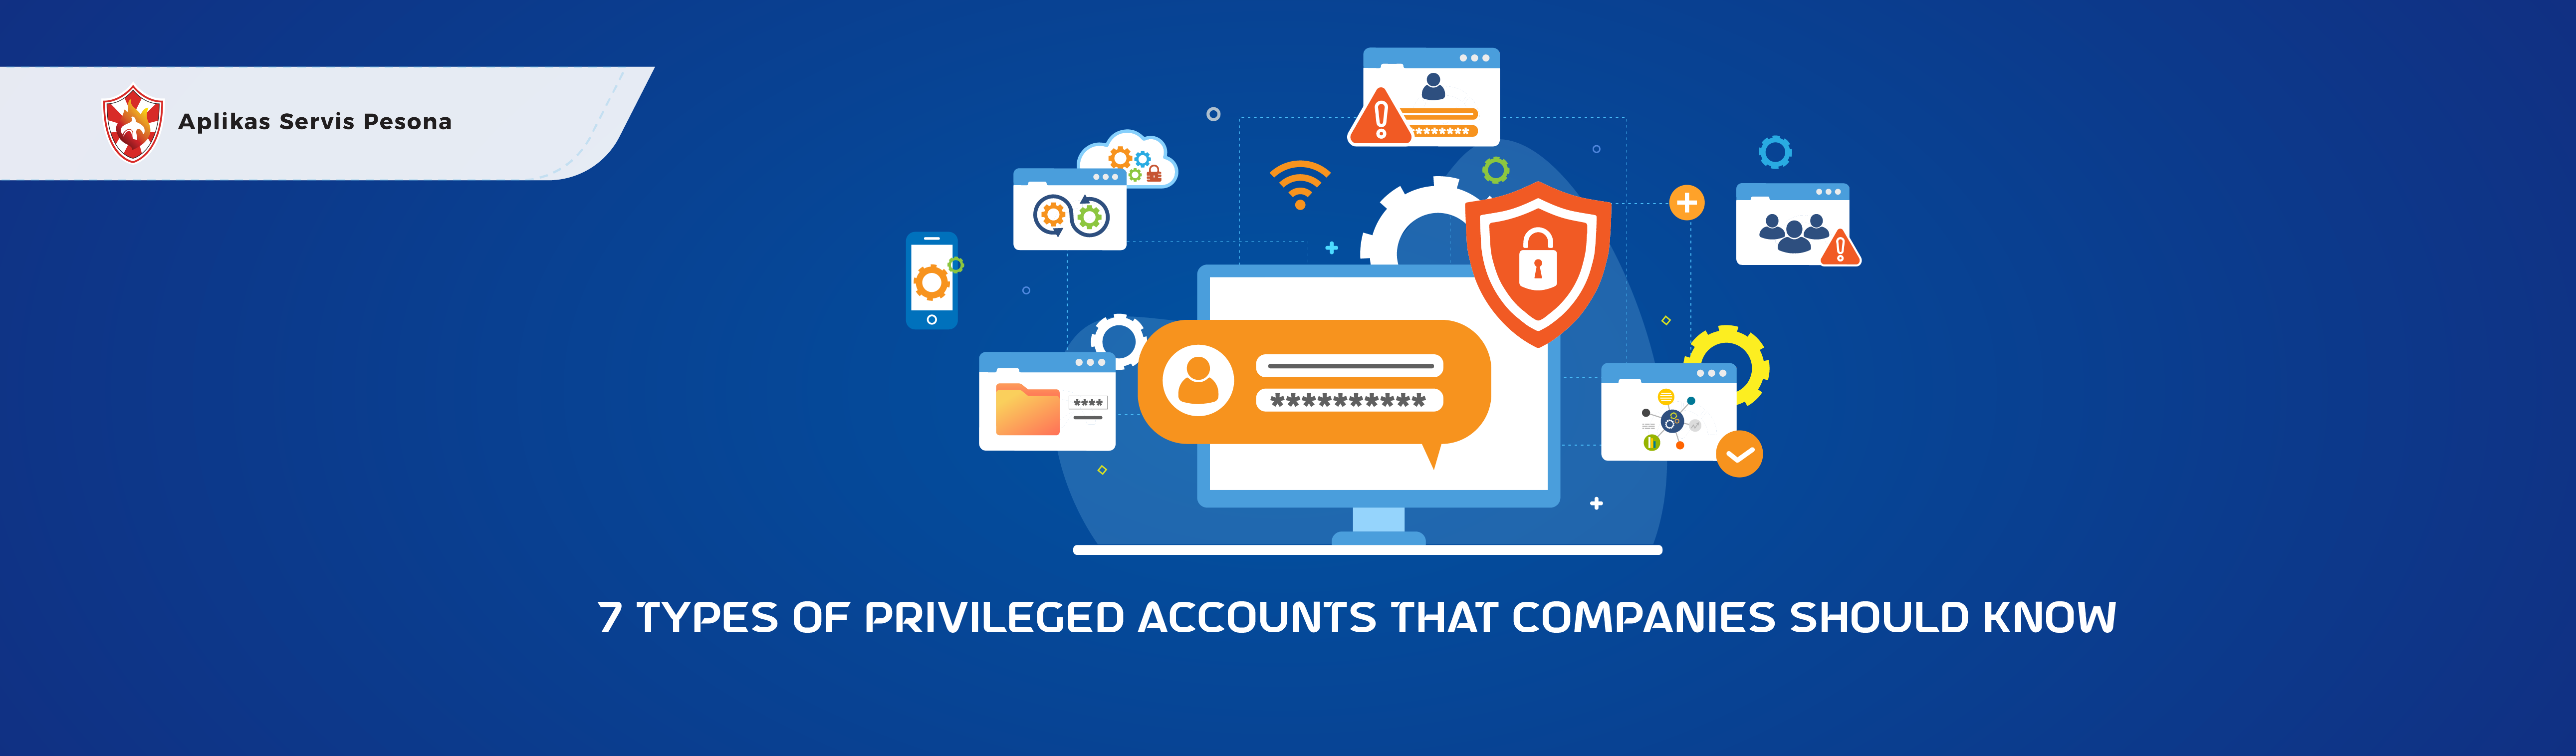 7 Types of Privileged Accounts that Companies must Know